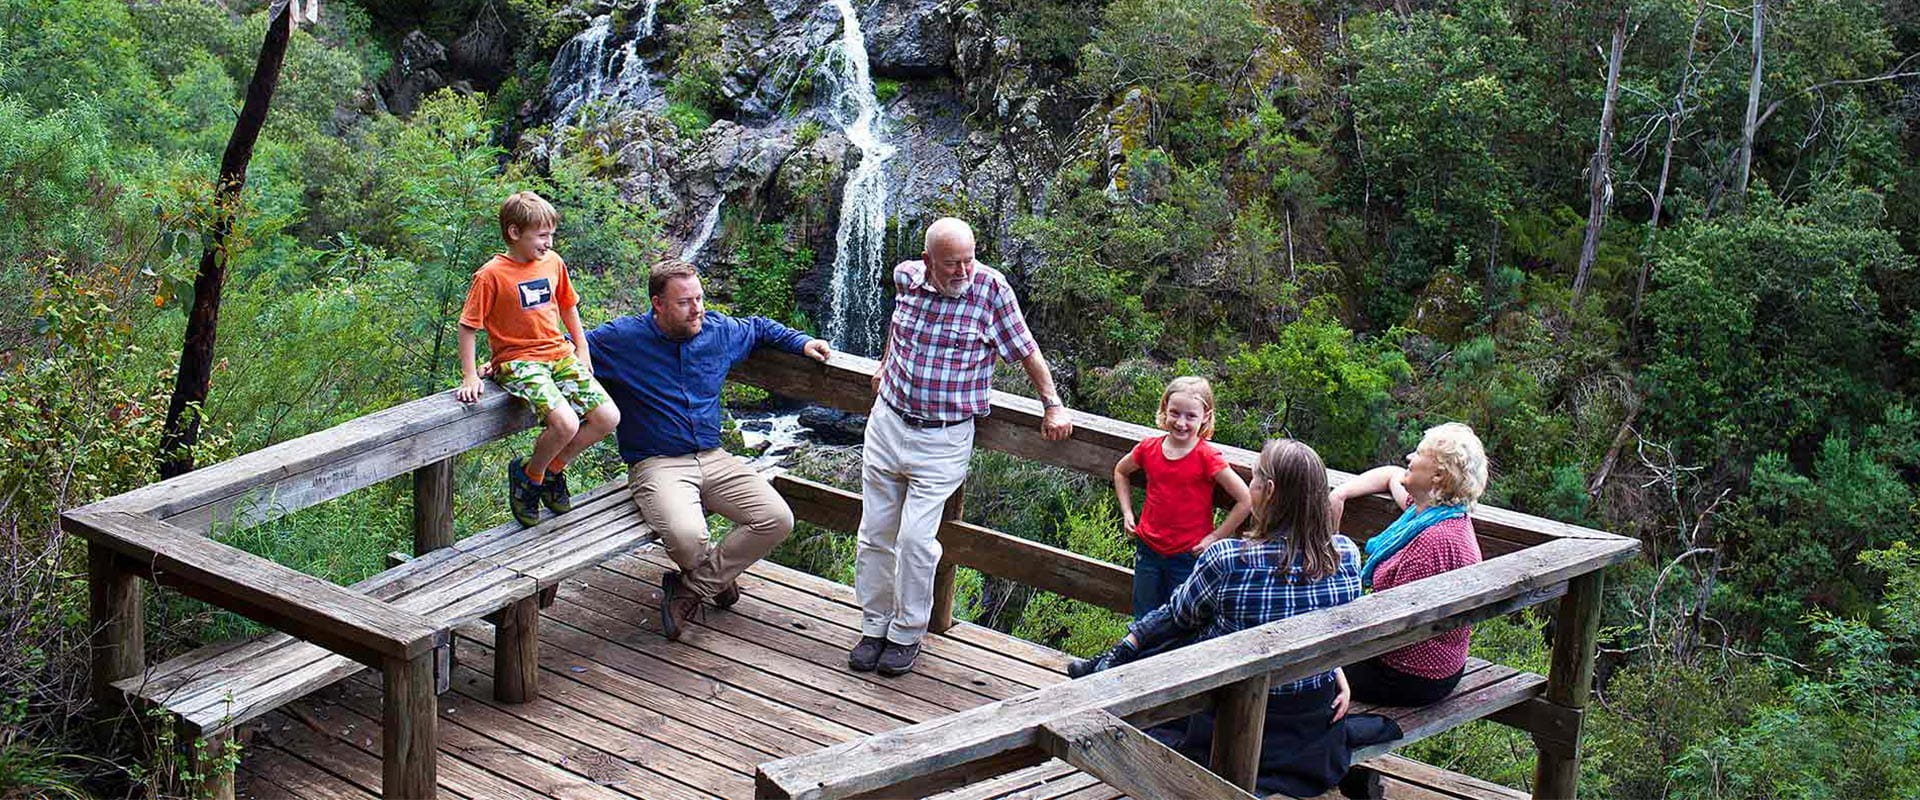 Three generations from the same family stop to chat and look at a Waterfall in the Alpine National Park near Buchan.